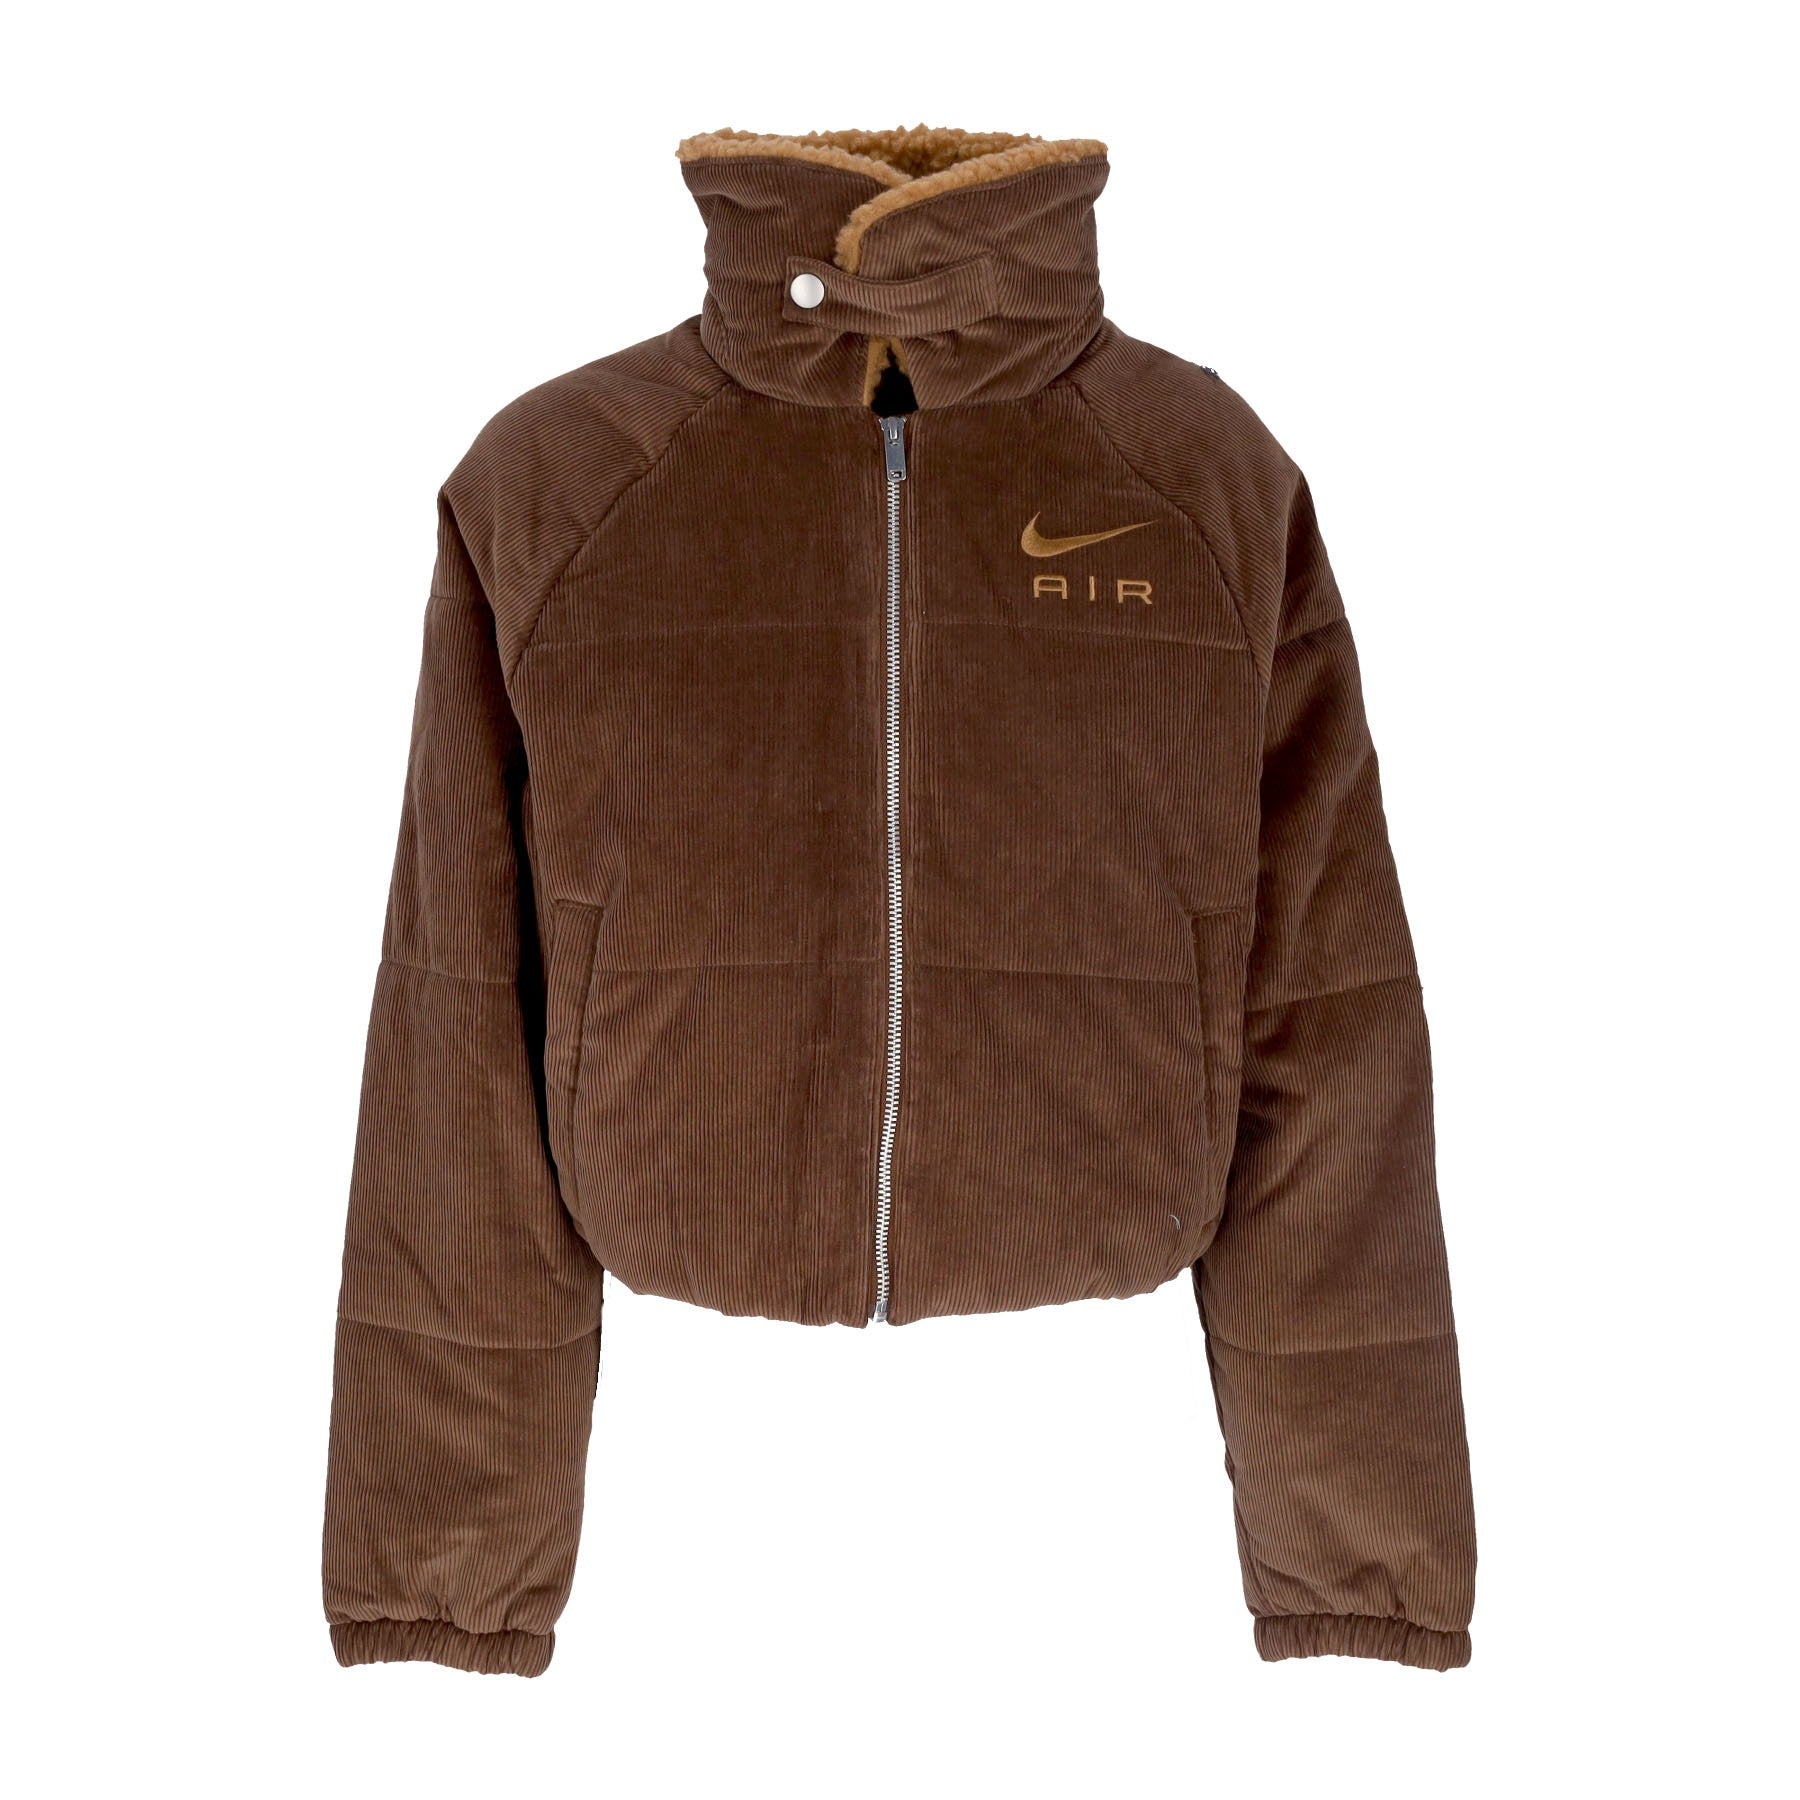 Nike, Giubbotto Corto Donna Sportswear Air Therma-fit Corduroy Winter Jacket, Cacao Wow/ale Brown/ale Brown